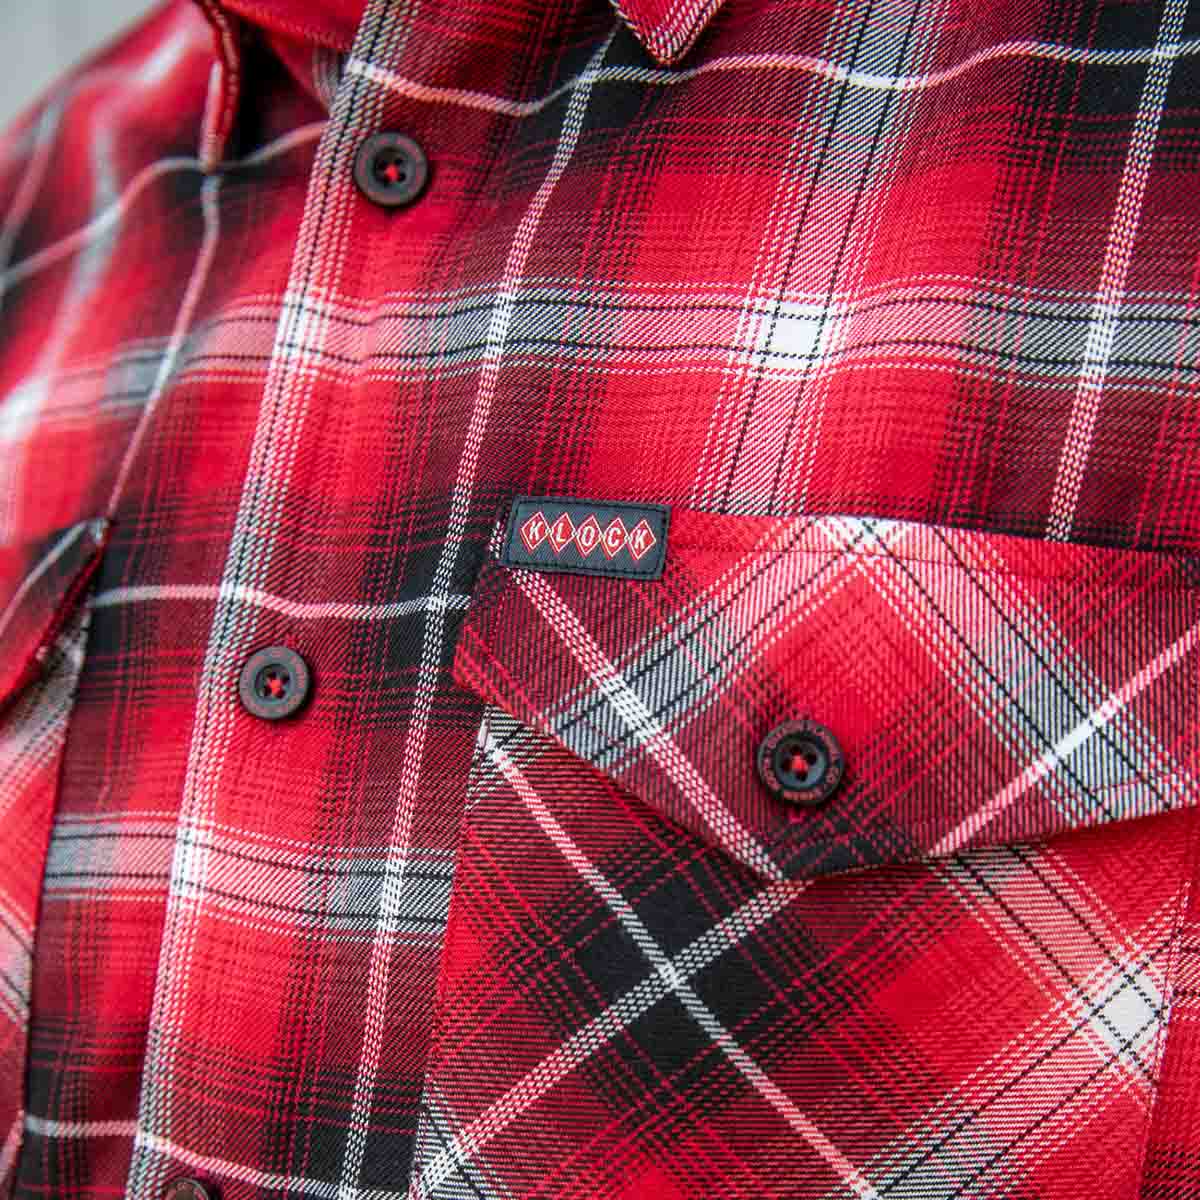 Klock Werks x Dixxon Tribute Flannel for Men Dual button down flap chest pockets with utility slot for pens, sunglasses, etc. and Klock Werks brand tag on left chest pocket(Dual button down flap chest pockets with utility slot for pens, sunglasses, etc. and Klock Werks brand tag on left chest pocket)